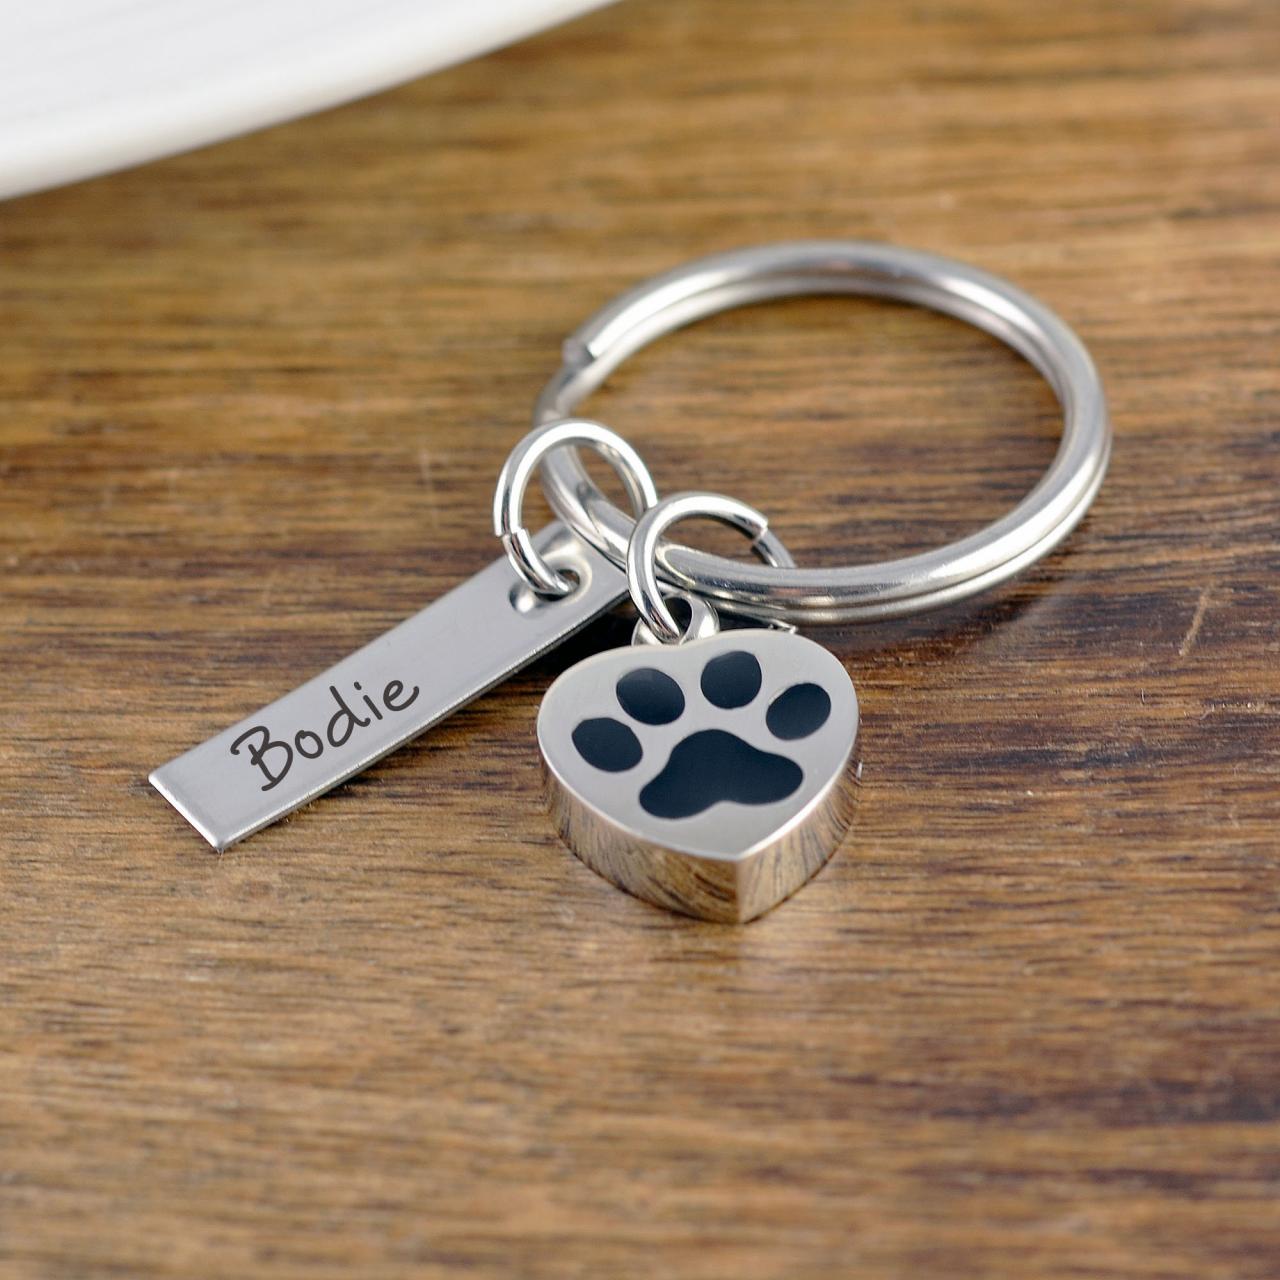 Dog Memorial Keychain, Cremation Urn, Cremation Jewelry, Loss Of Pet, Ash Jewelry, Cremation Keepsake, Dog Gift For Owners,dog Memorial Gift